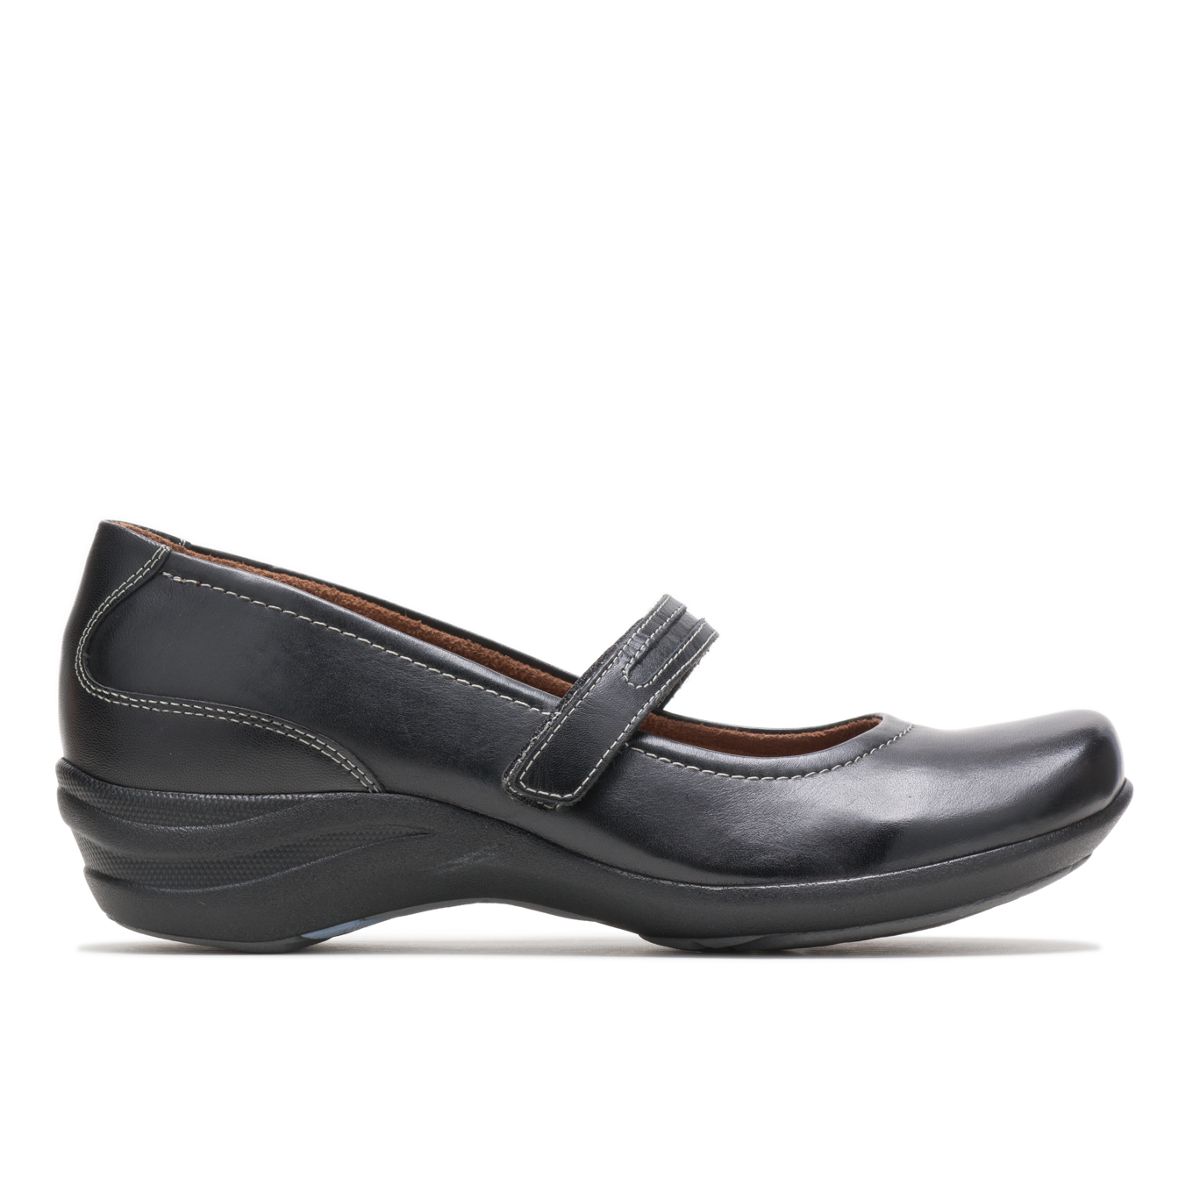 hush puppies shoes for women